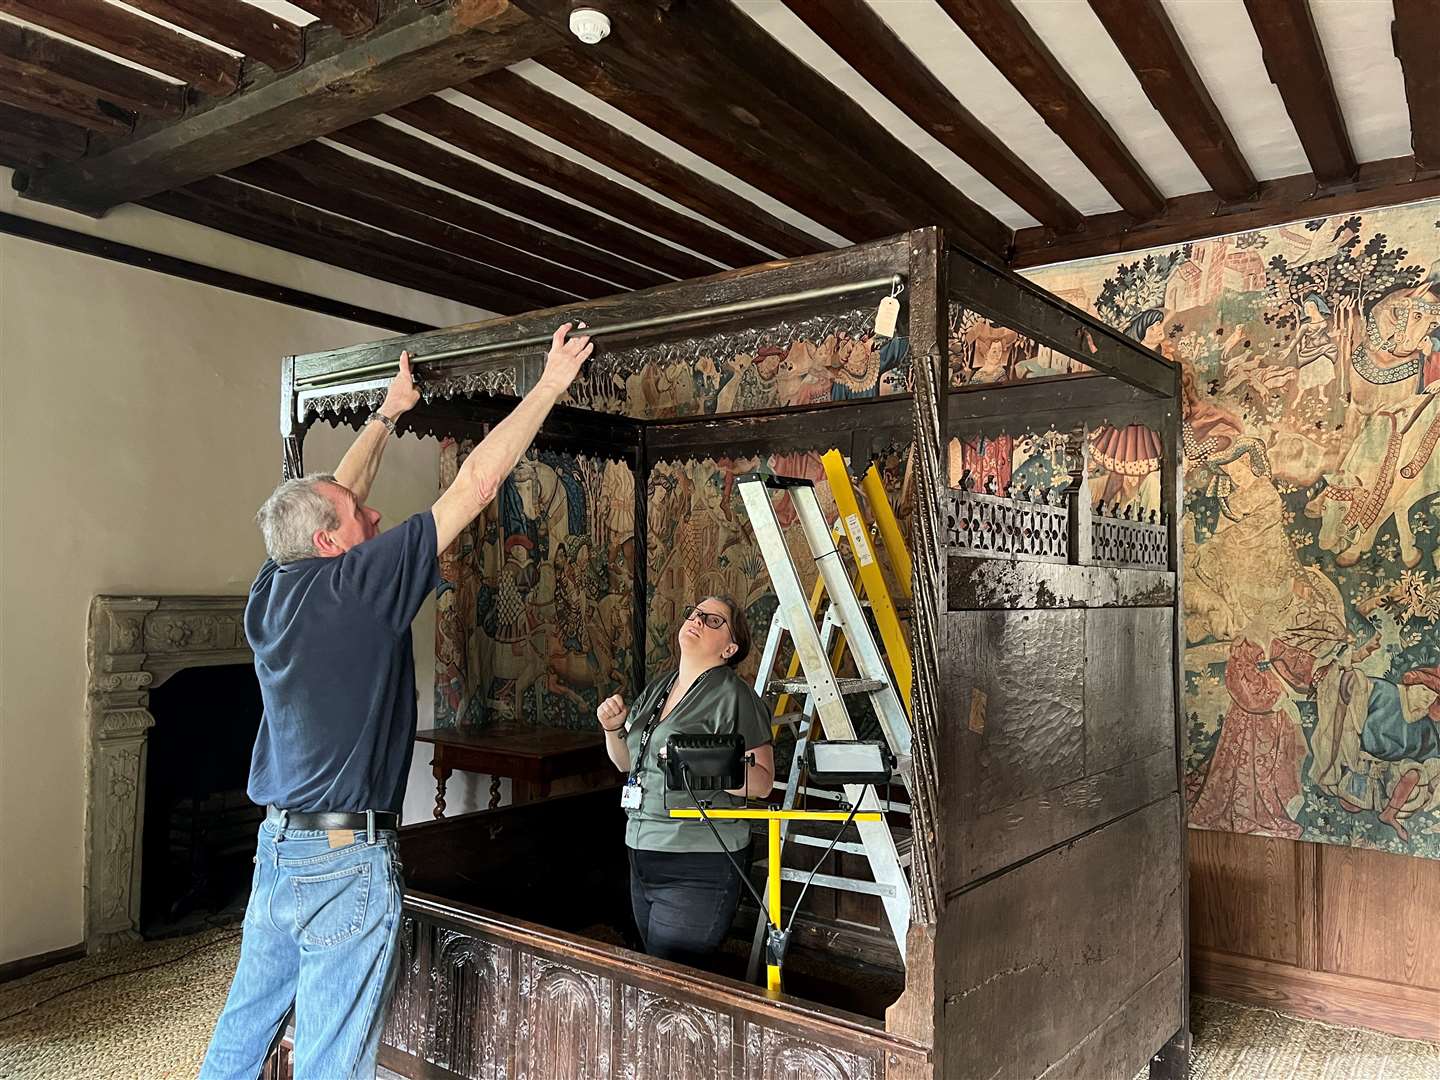 Renovation work on the Best Bedchamber at Hever Castle. Photo: Hever Castle and Gardens